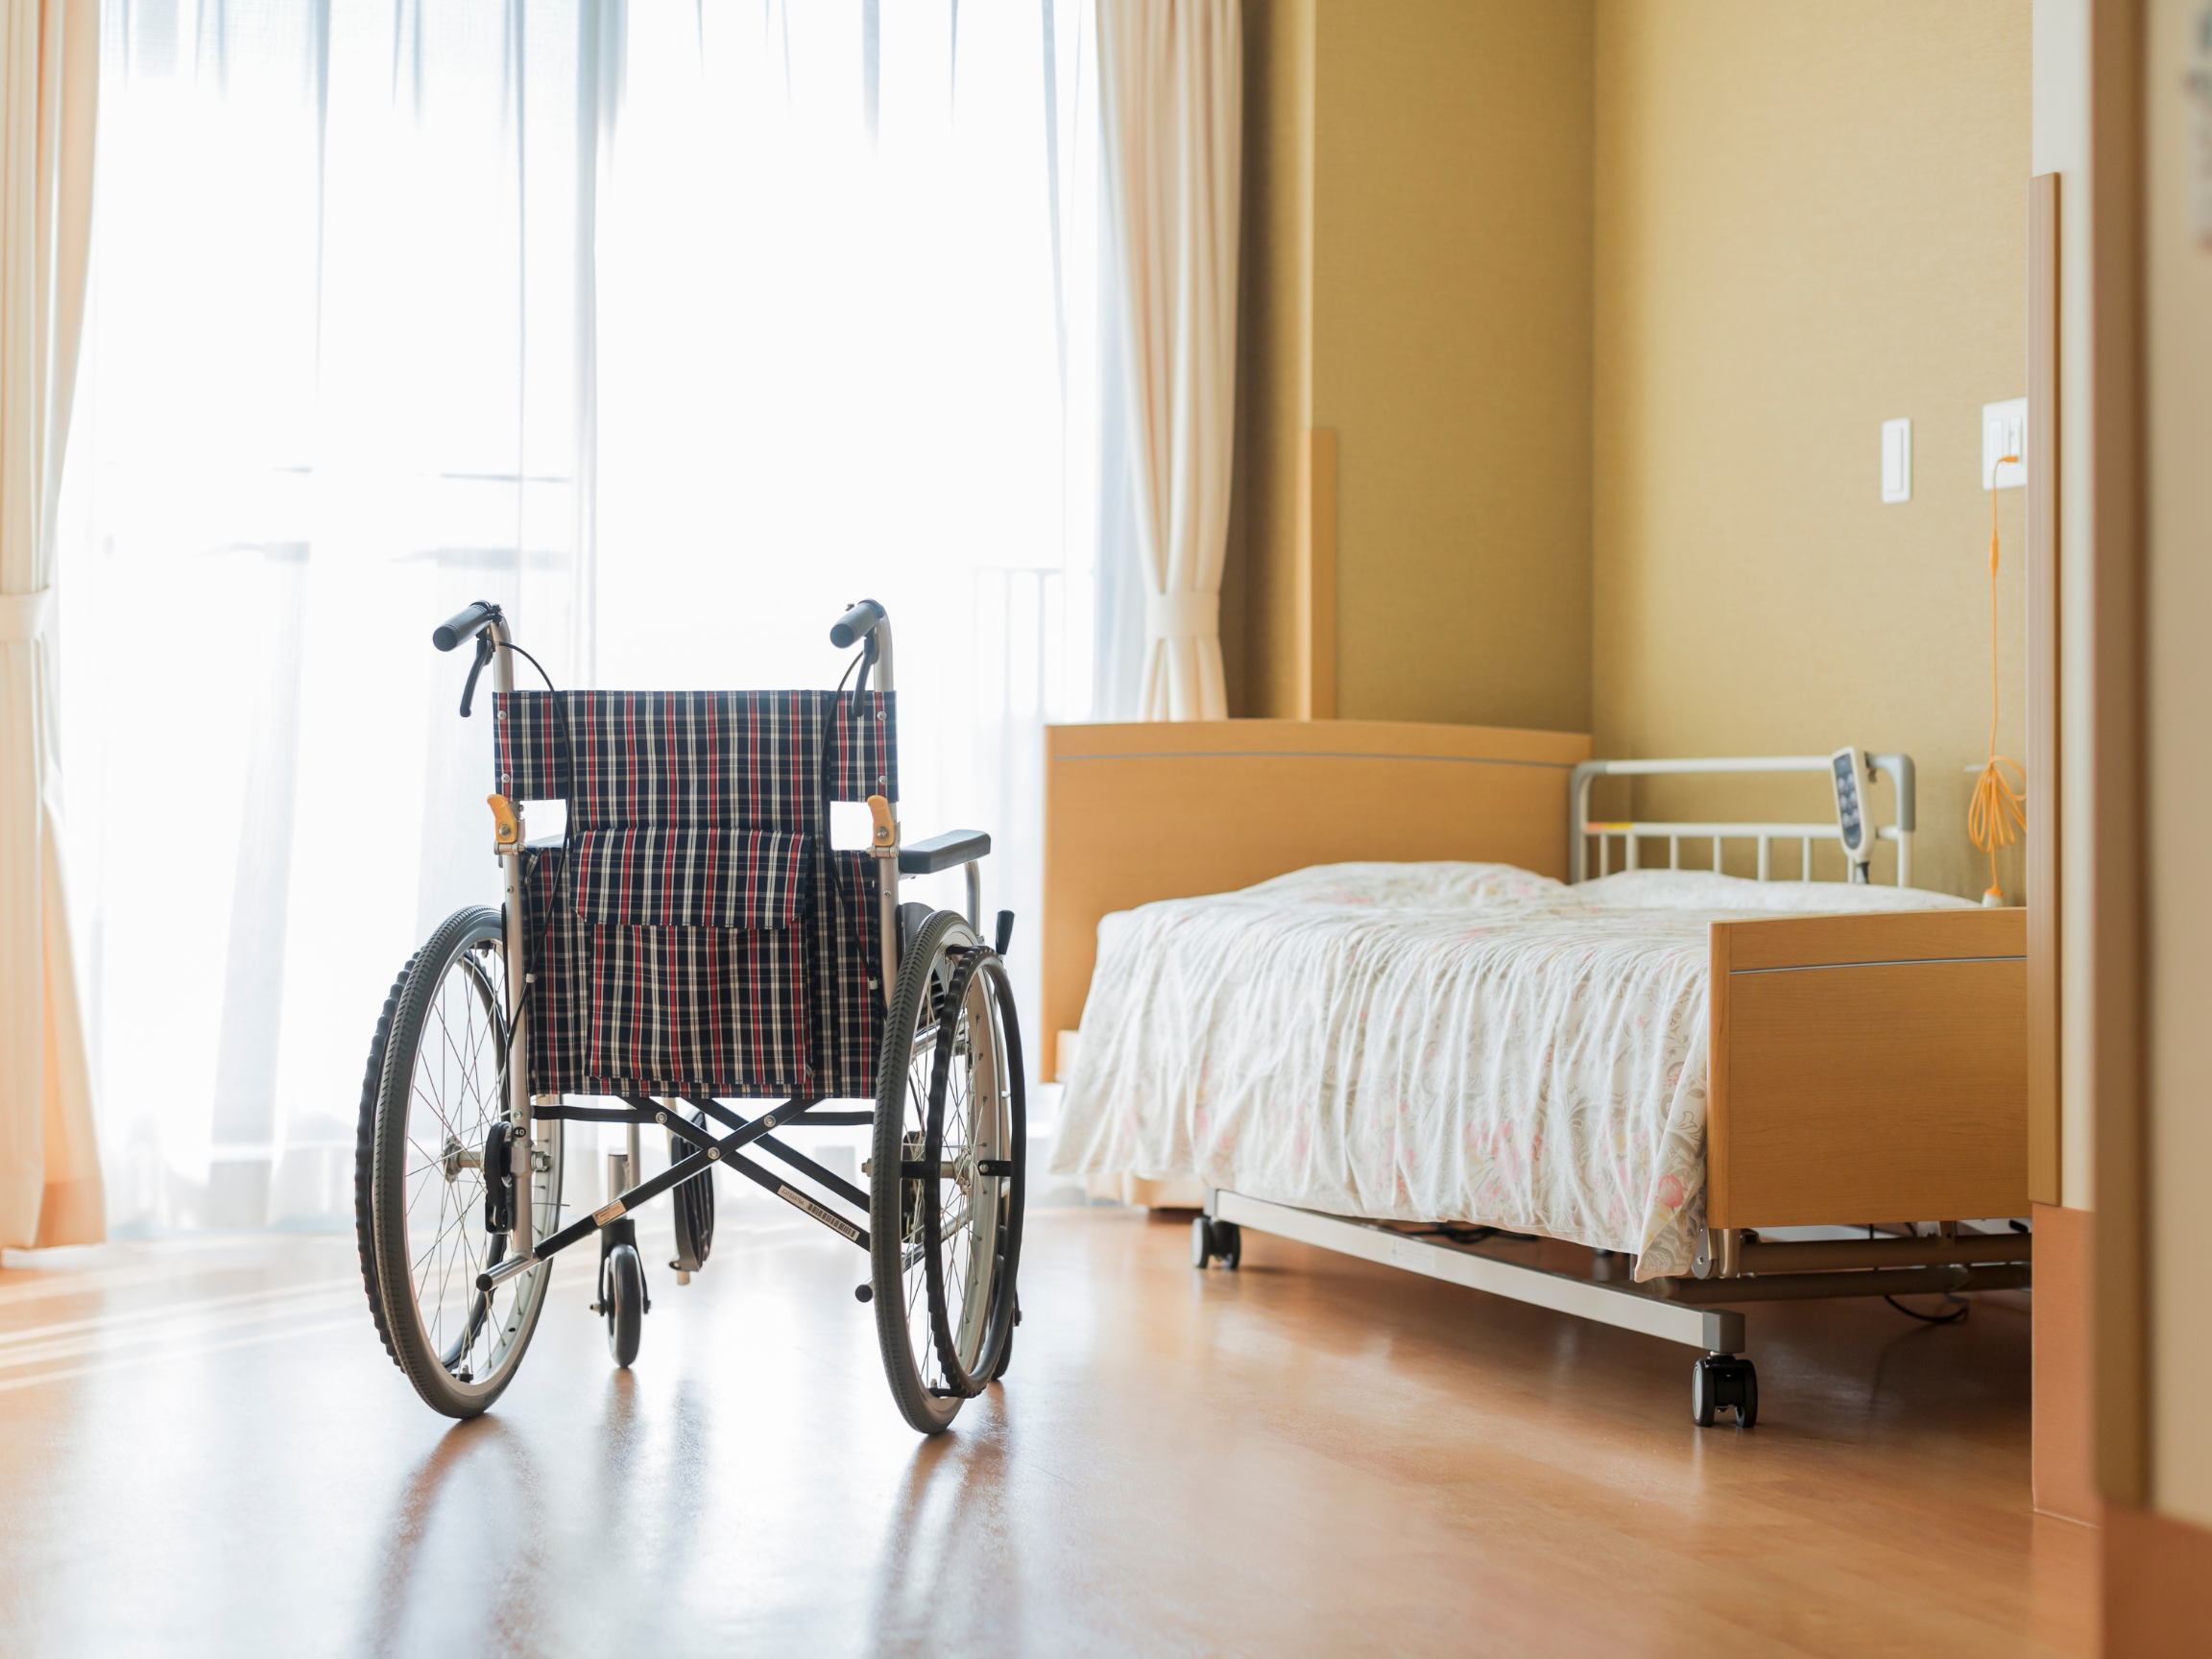 Client Alert: New Nursing Home Regulations are on the Horizon